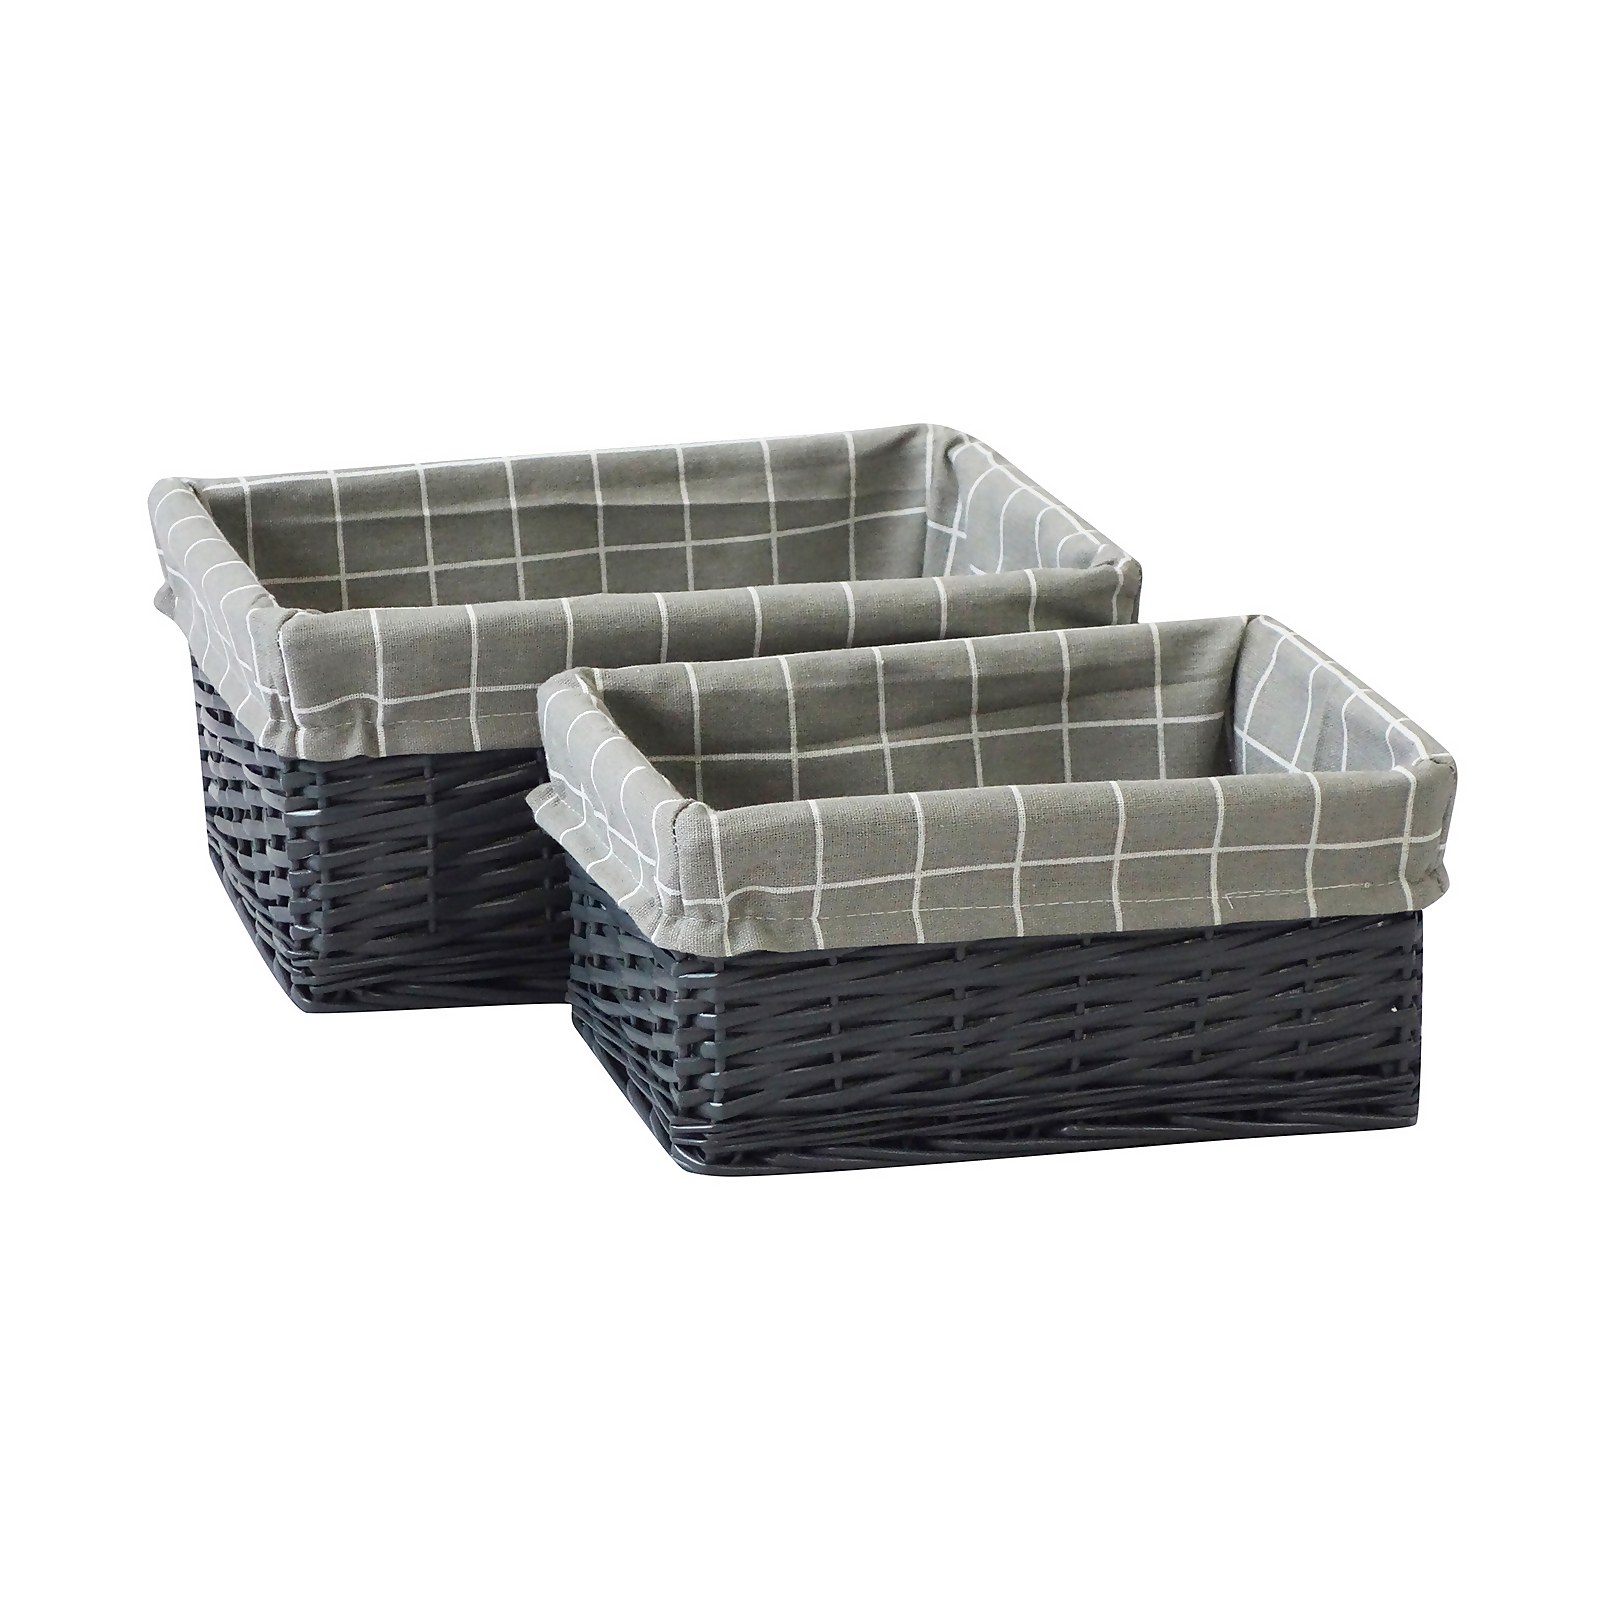 Photo of Set Of 2 Grey Willow Lined Baskets